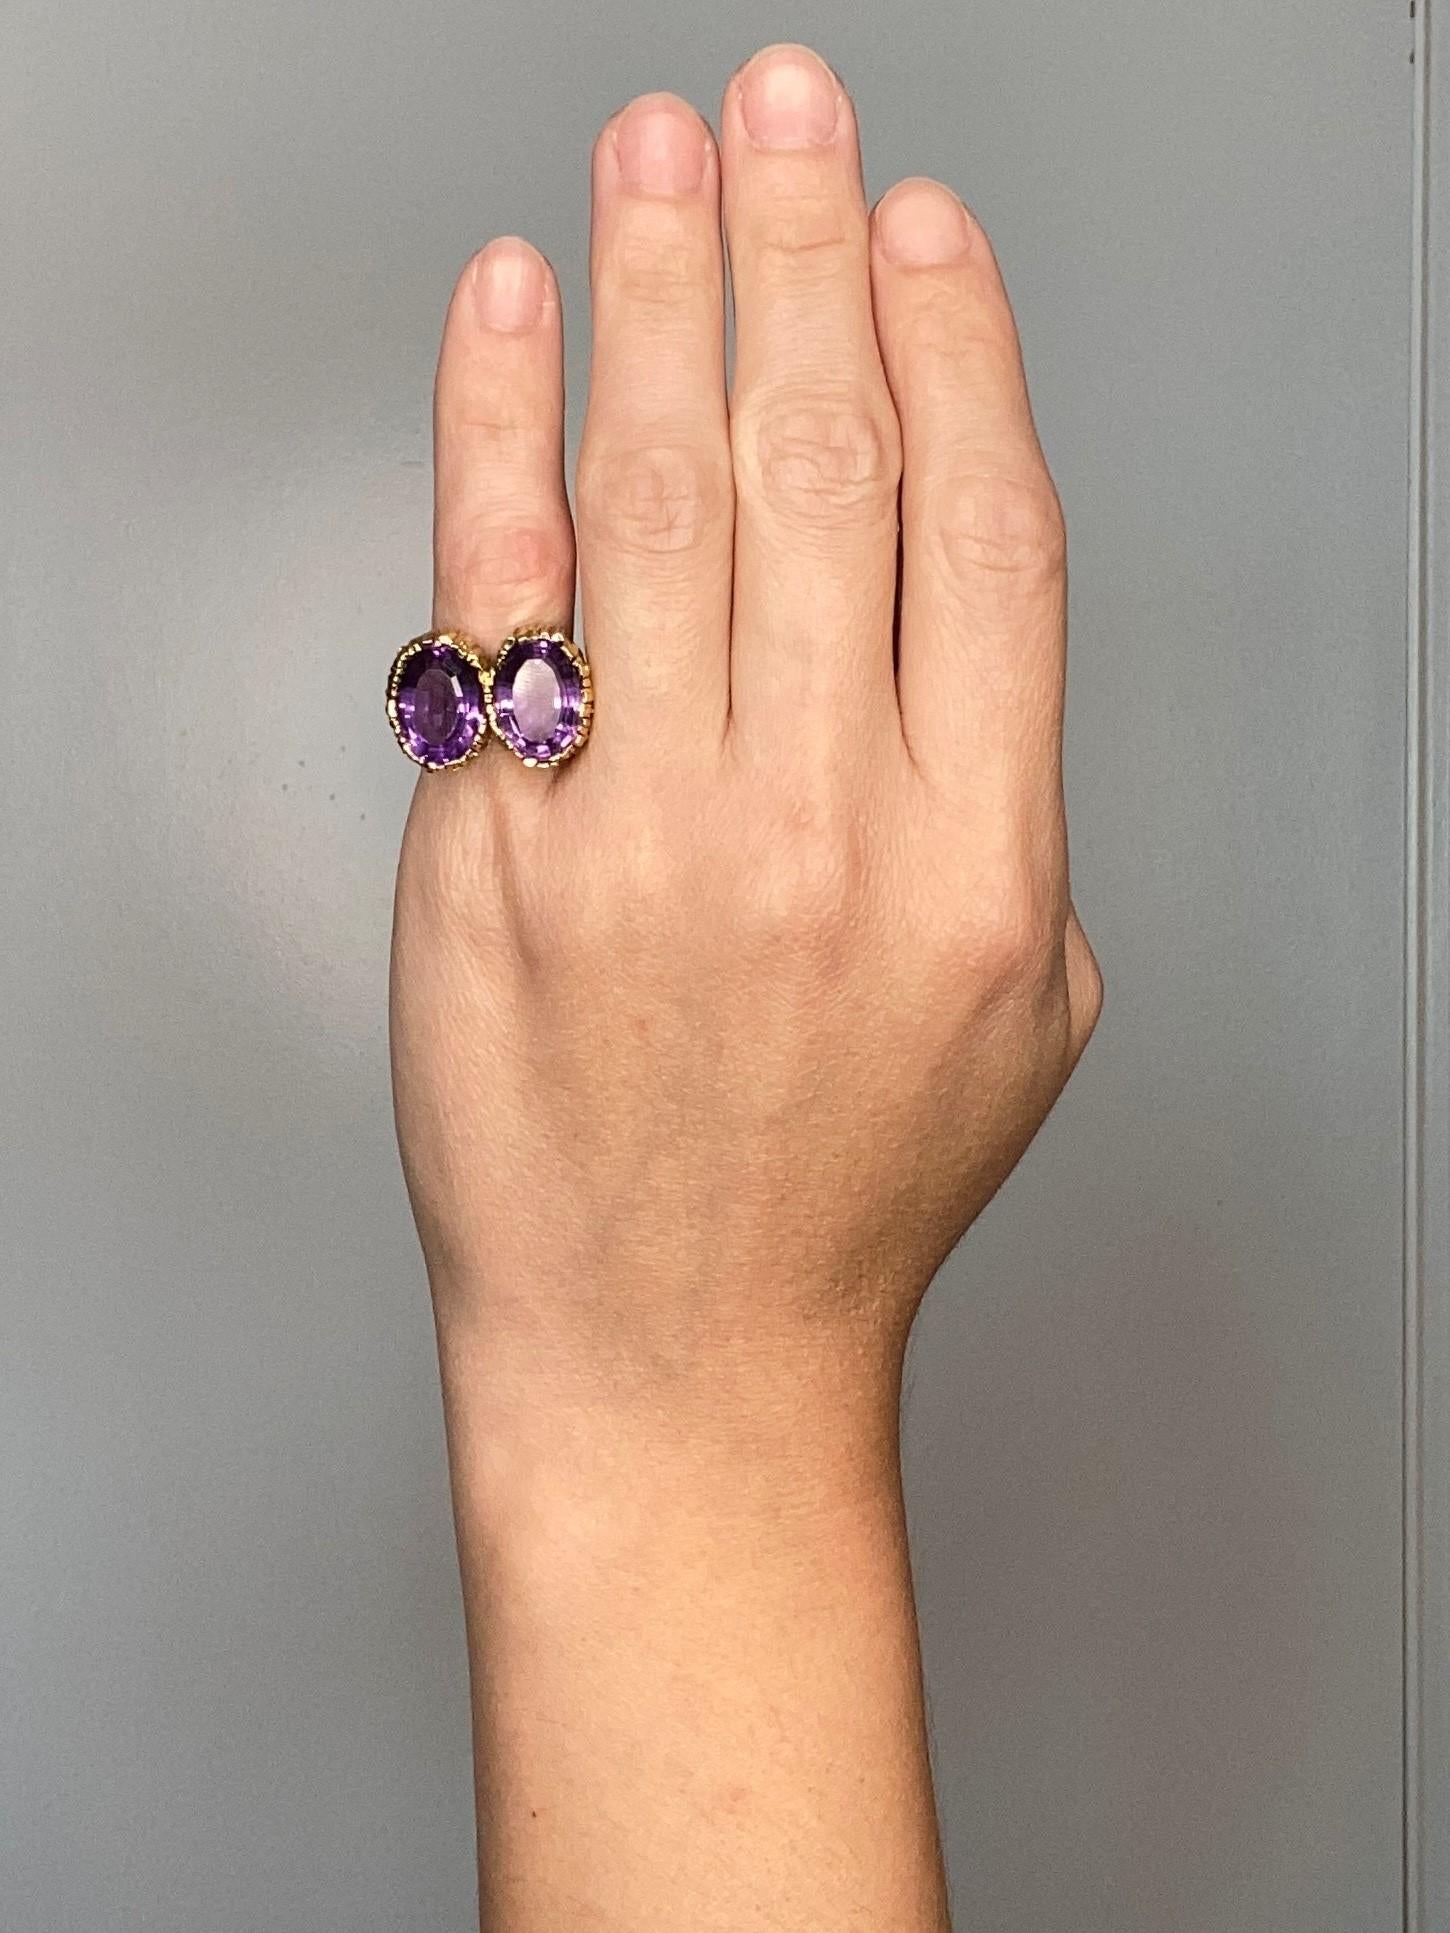 Women's or Men's Tiffany Co. Andrew Grima 1972 London Cocktail Ring 18Kt with 16.45 Cts Amethyst For Sale